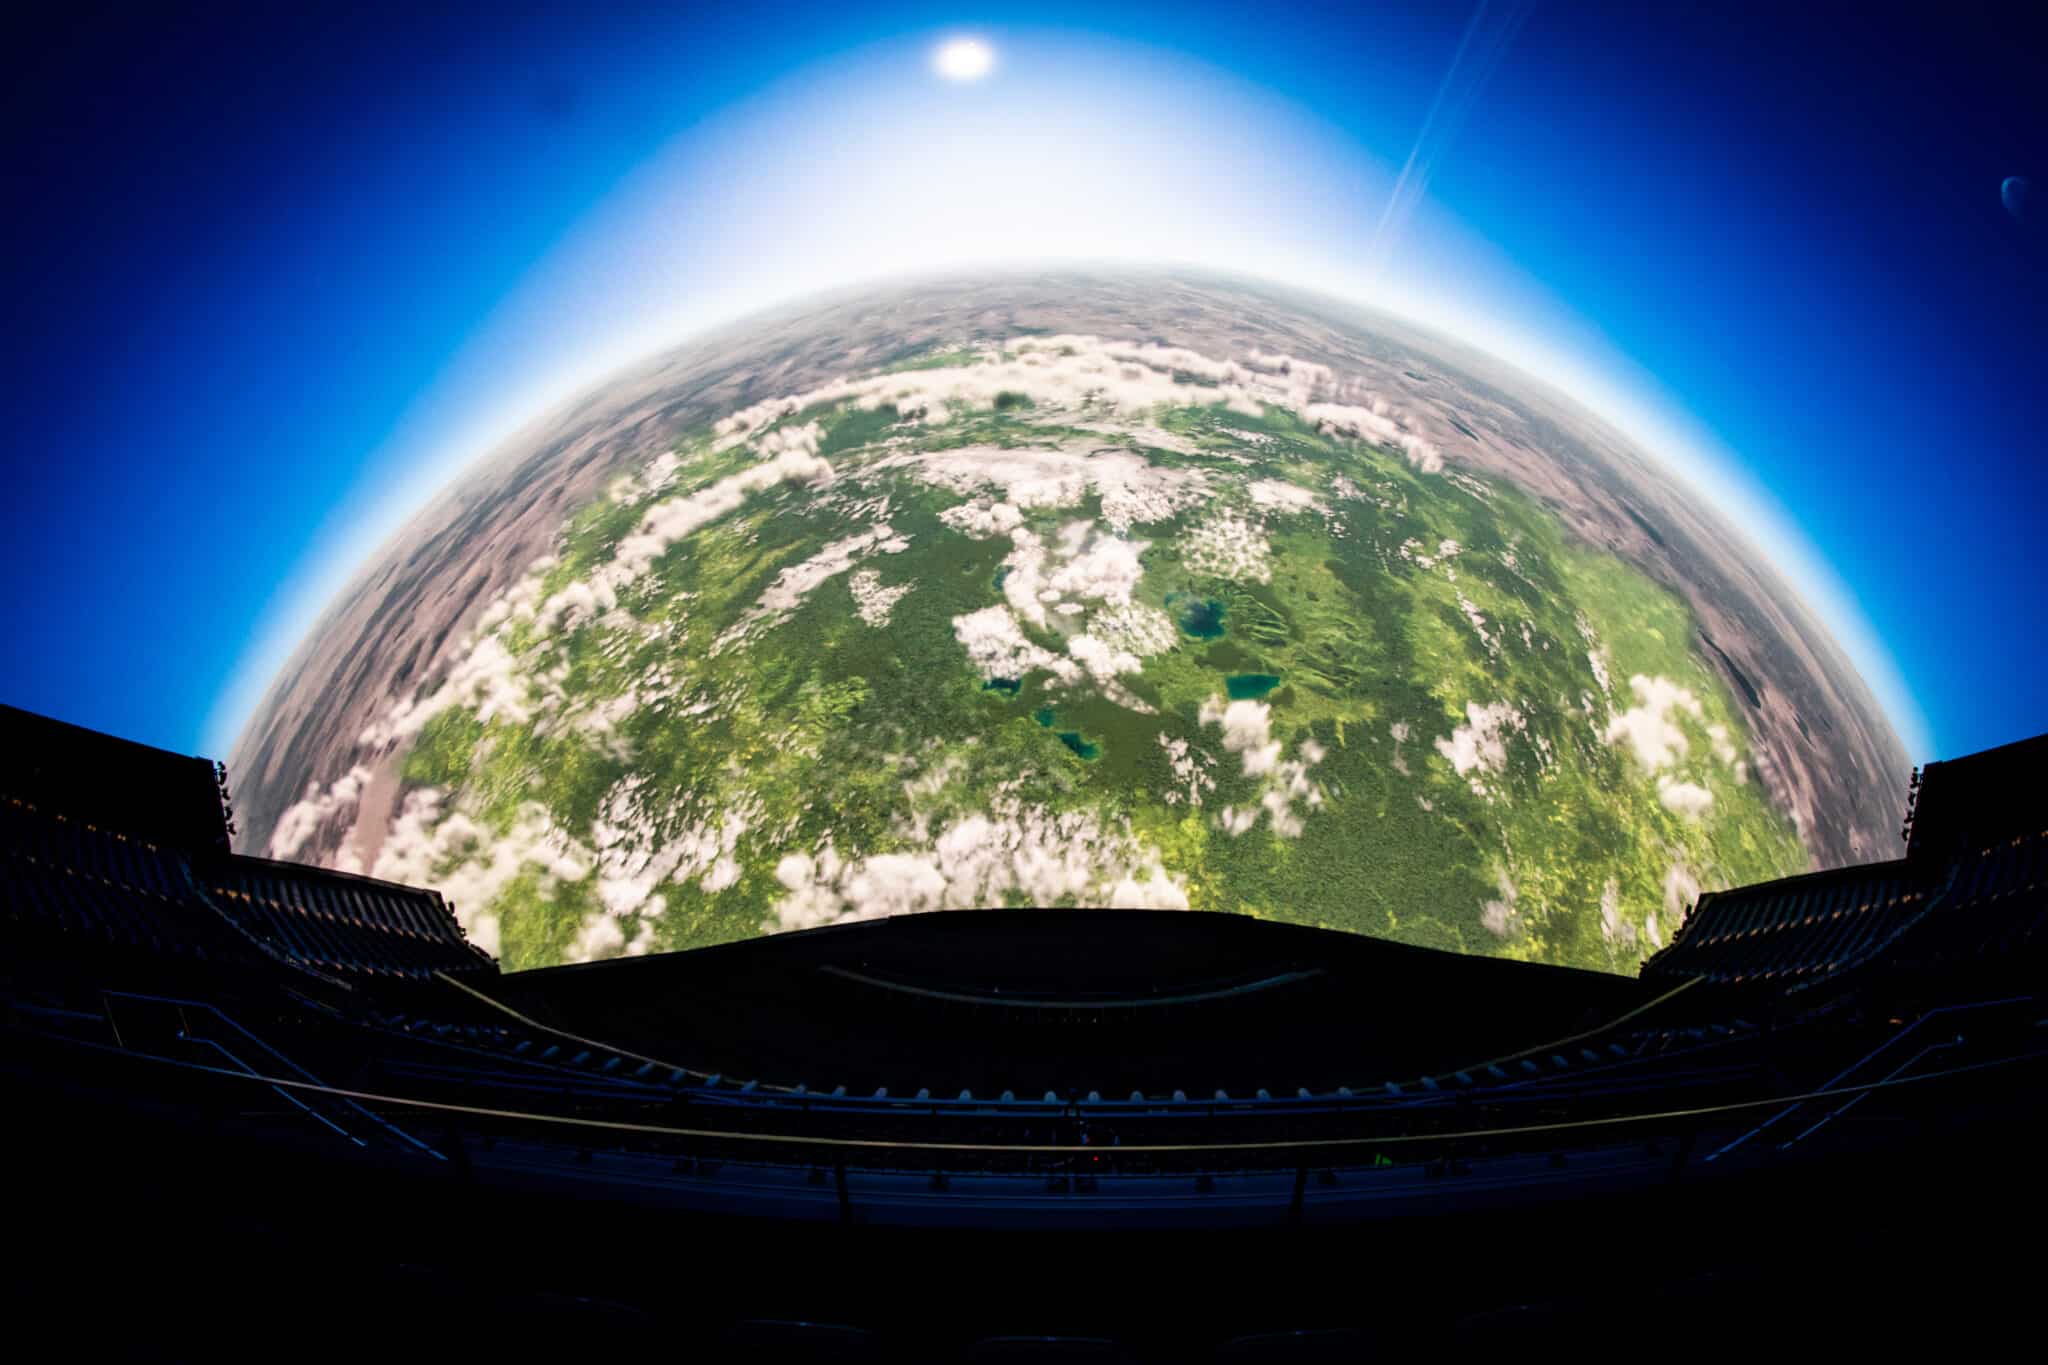 image of the Earth from space displayed in Sphere